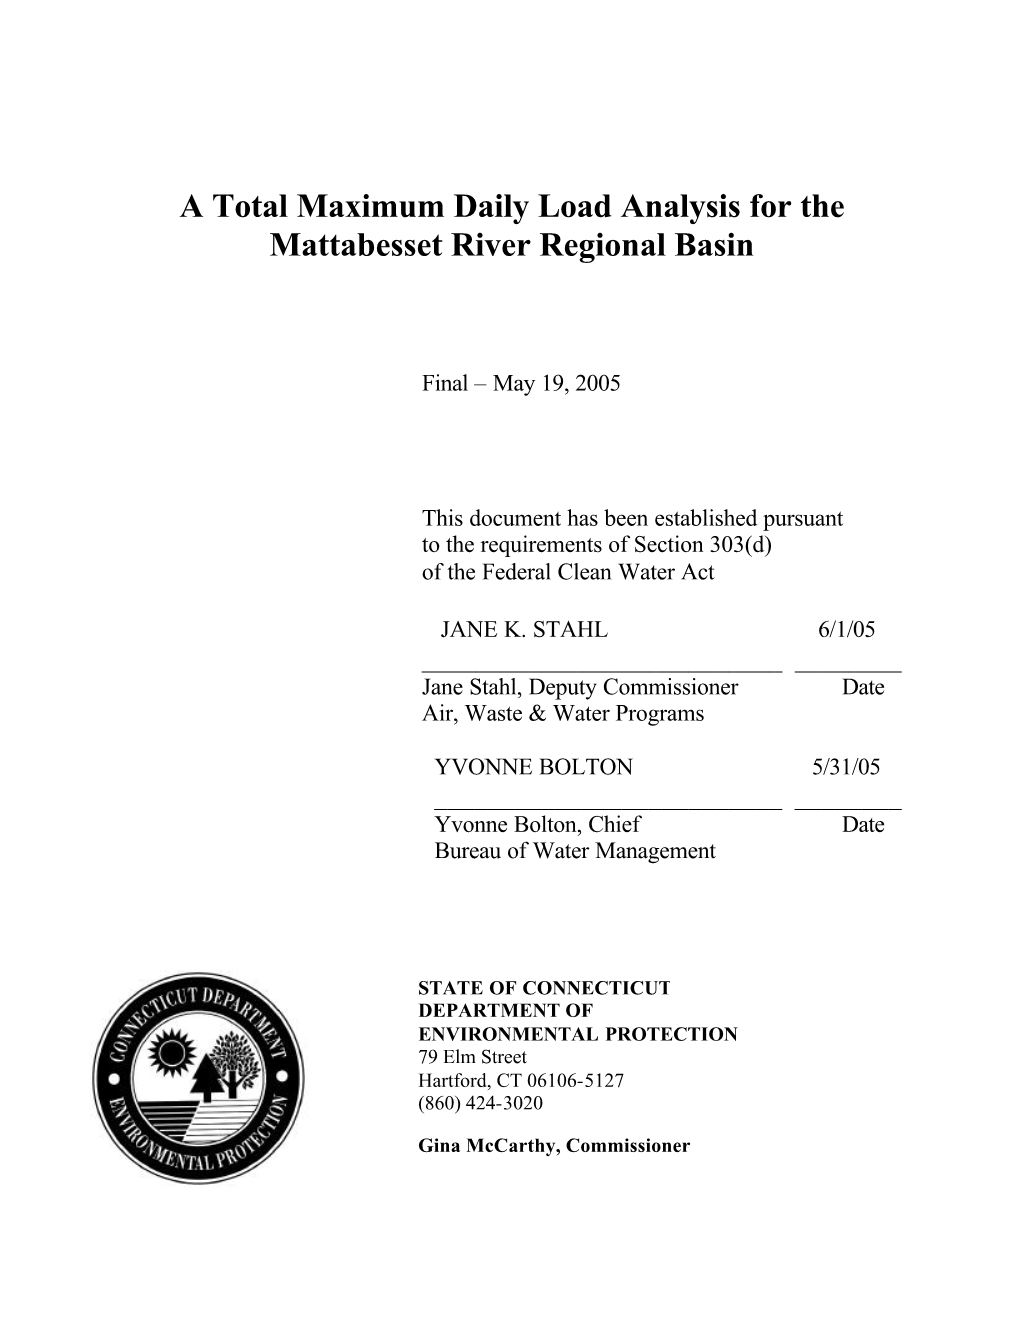 A Total Maximum Daily Load Analysis for the Mattabesset River Regional Basin